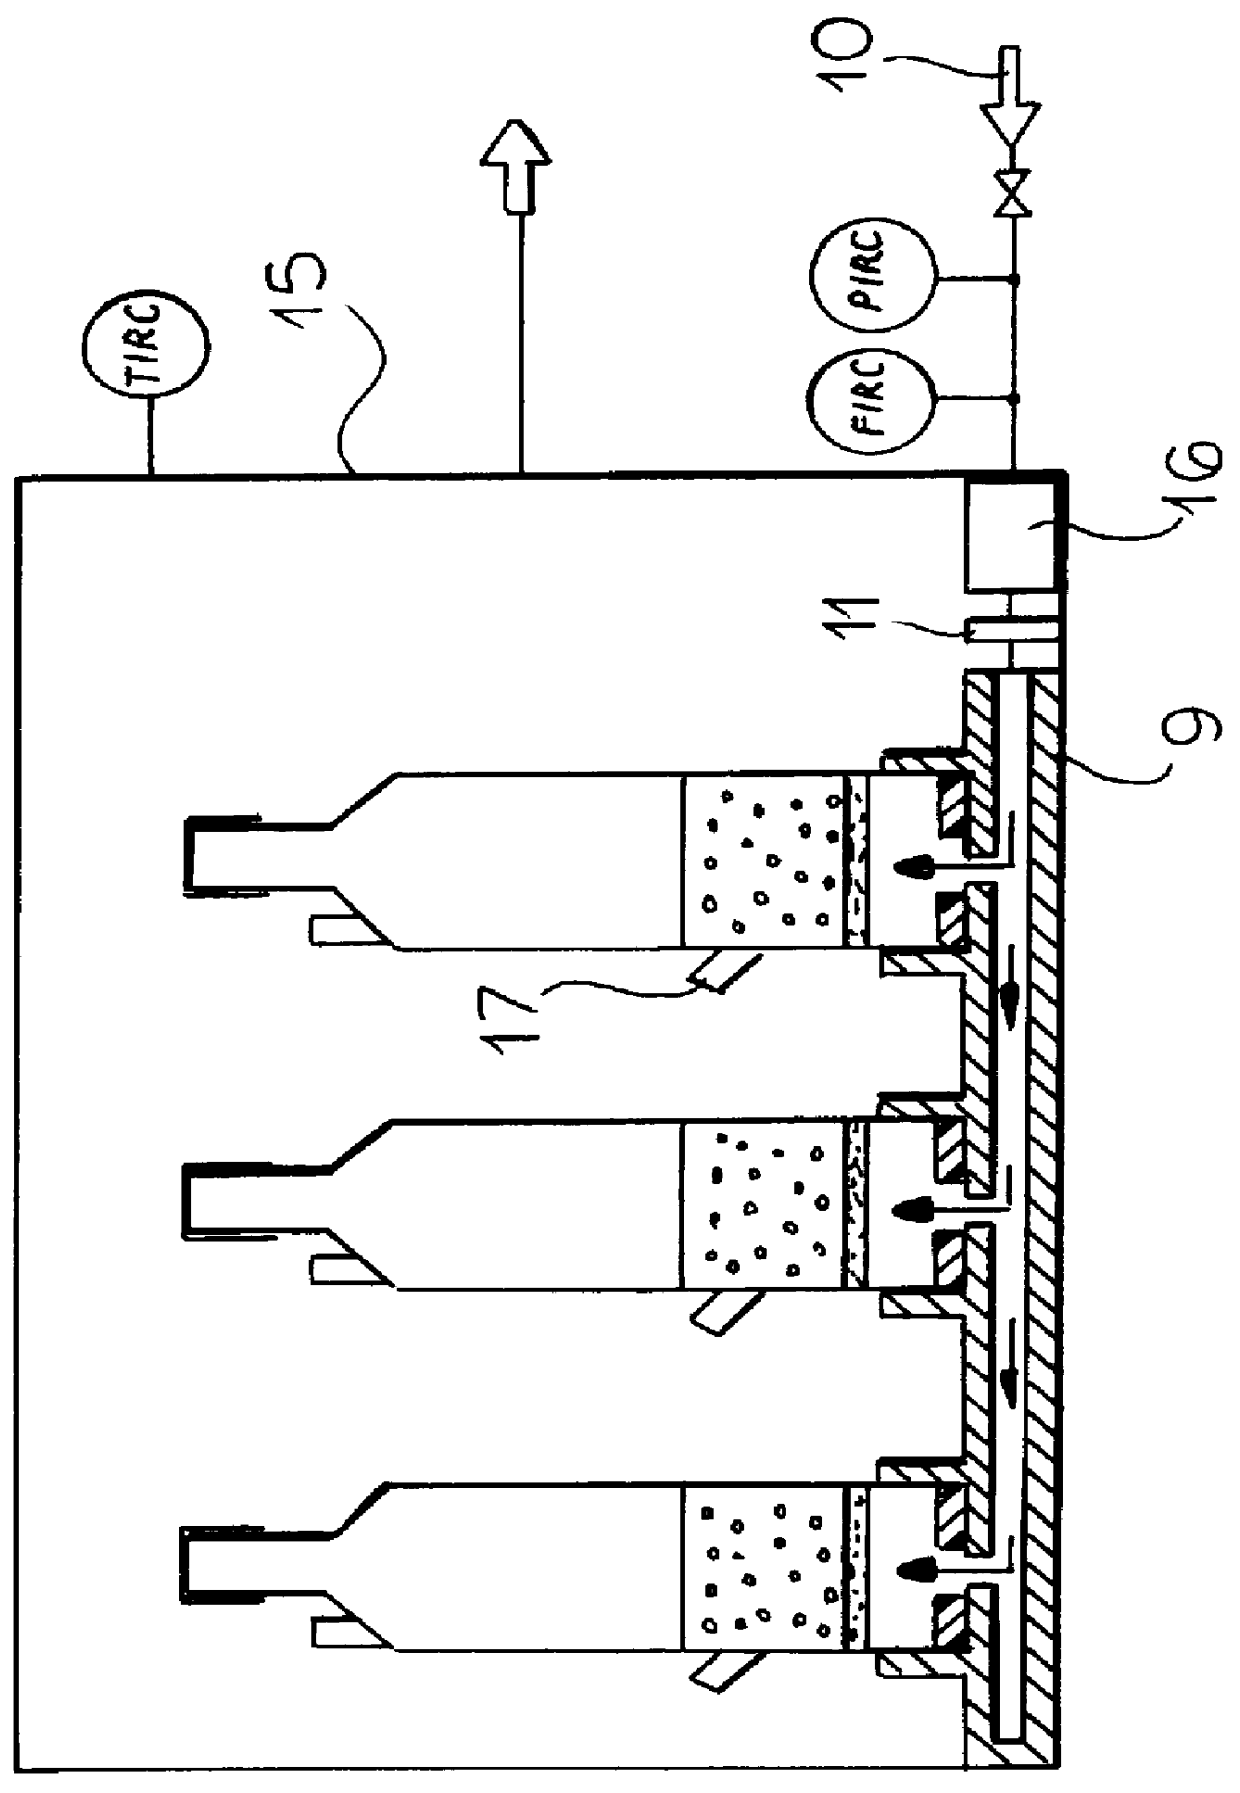 Device for the series cultivation of micro-organisms or cells in gasified liquid columns